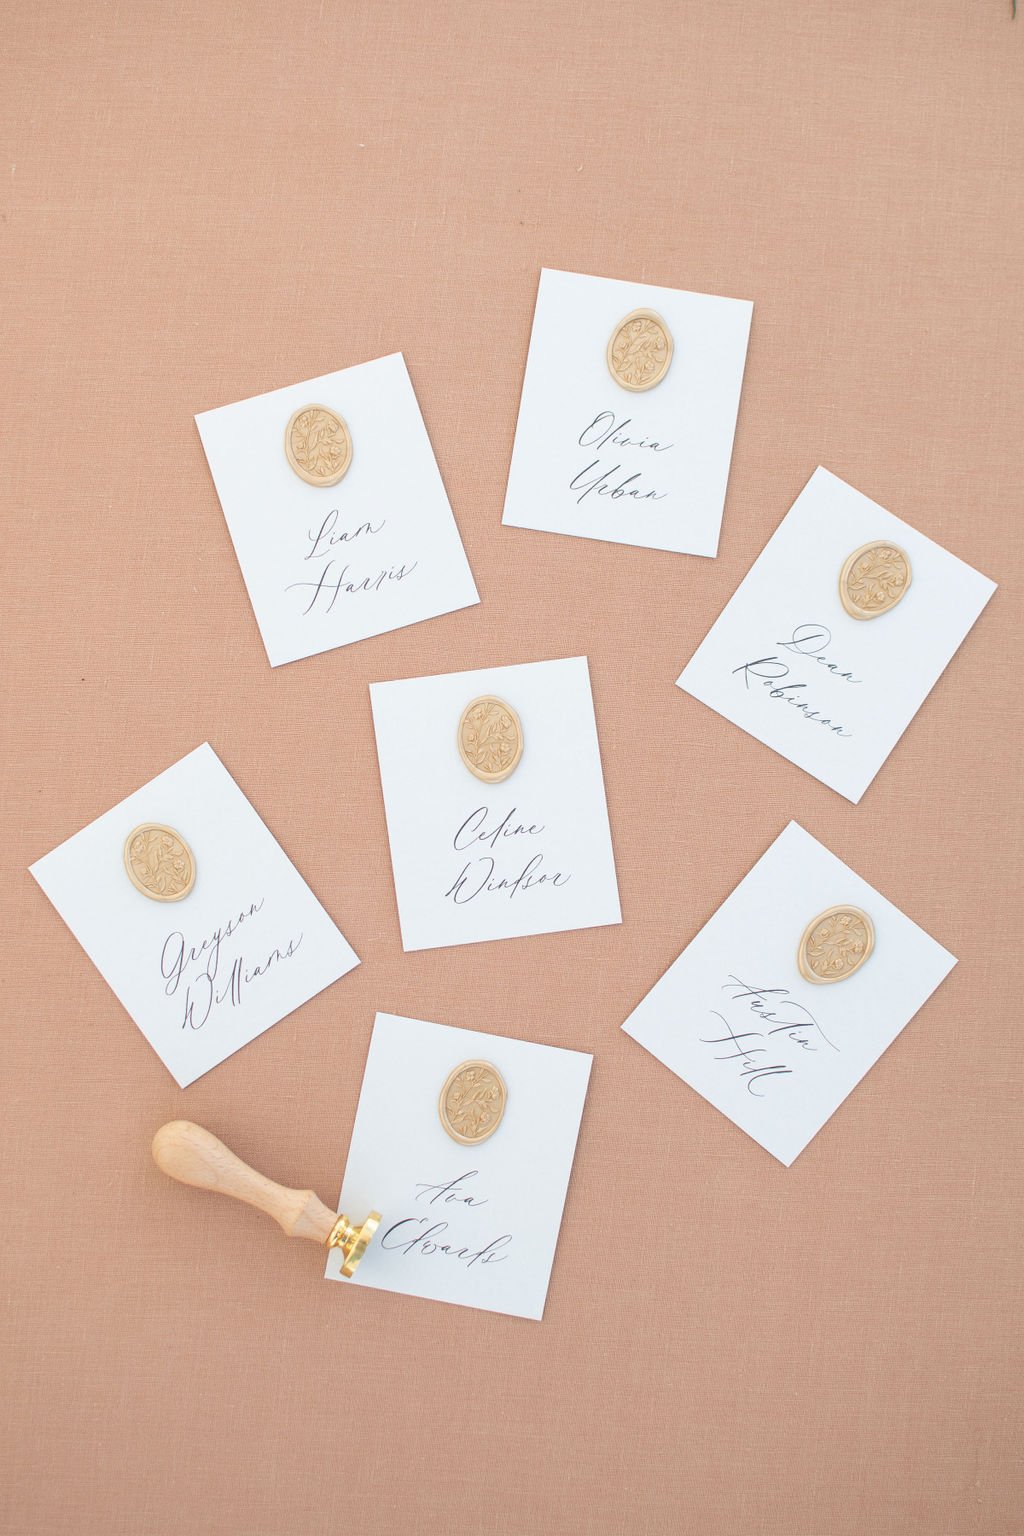 Custom wedding place cards with gold wax by Paper Palette.